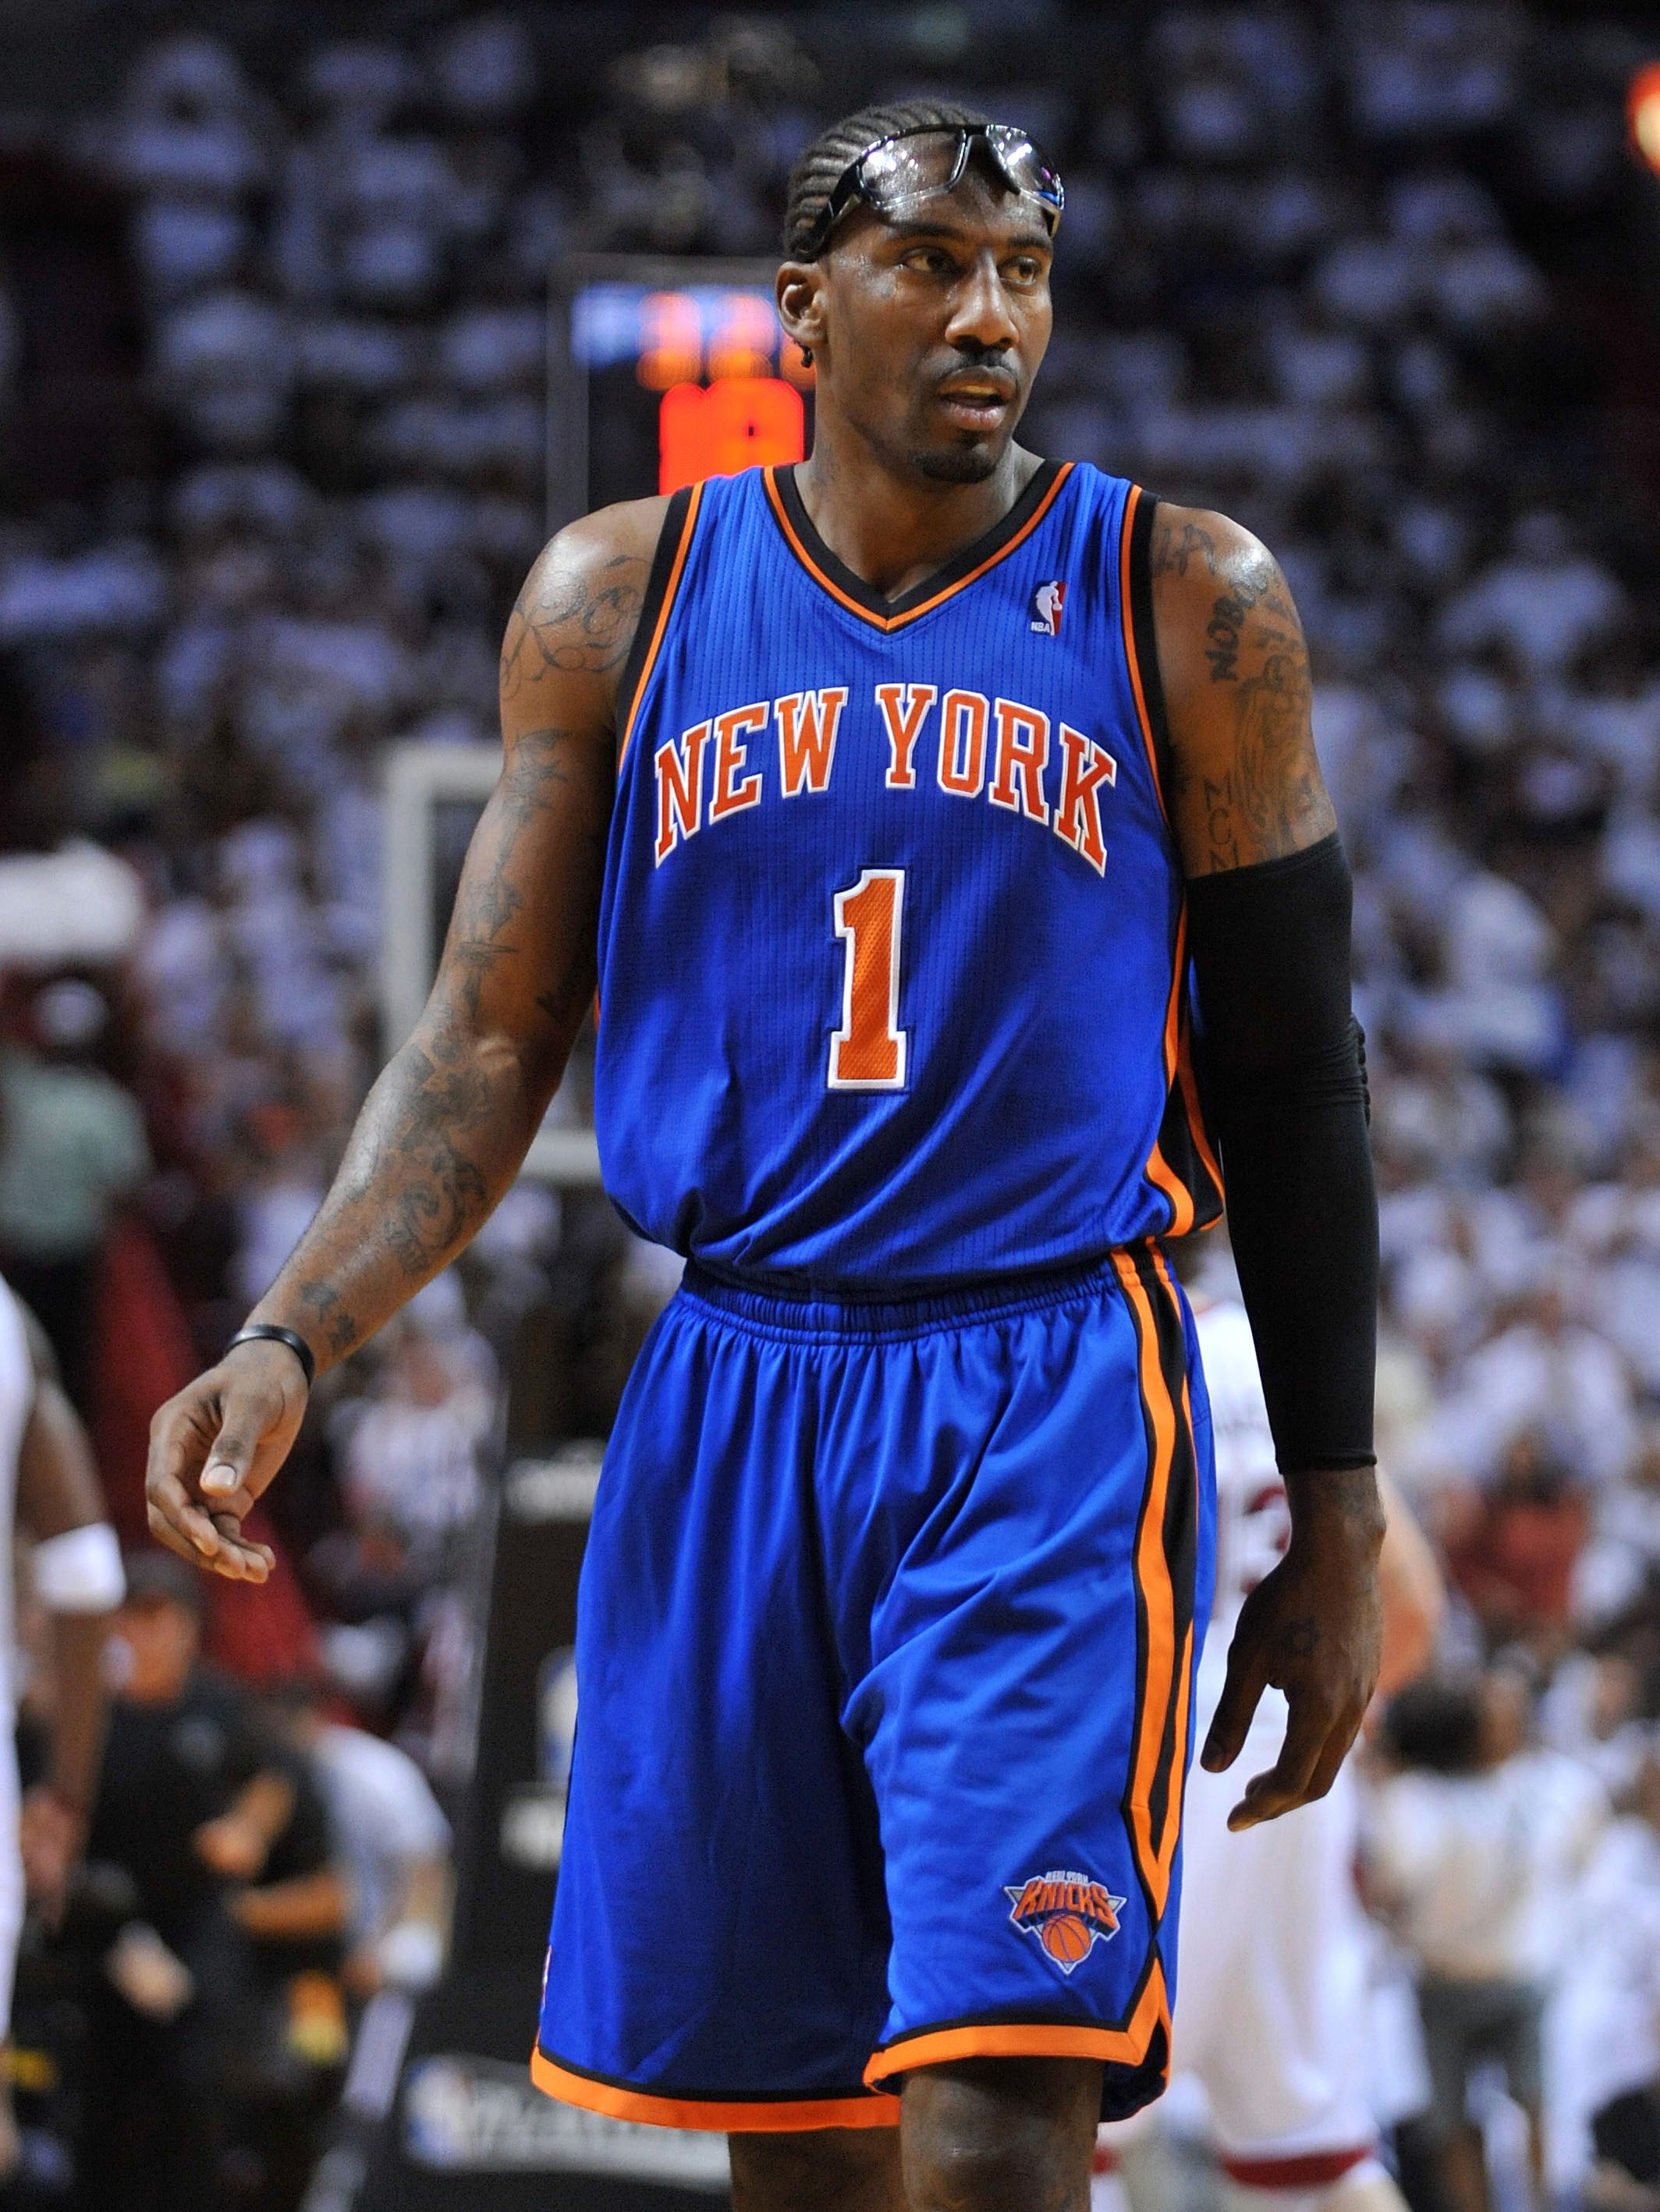 amare stoudemire new york knicks